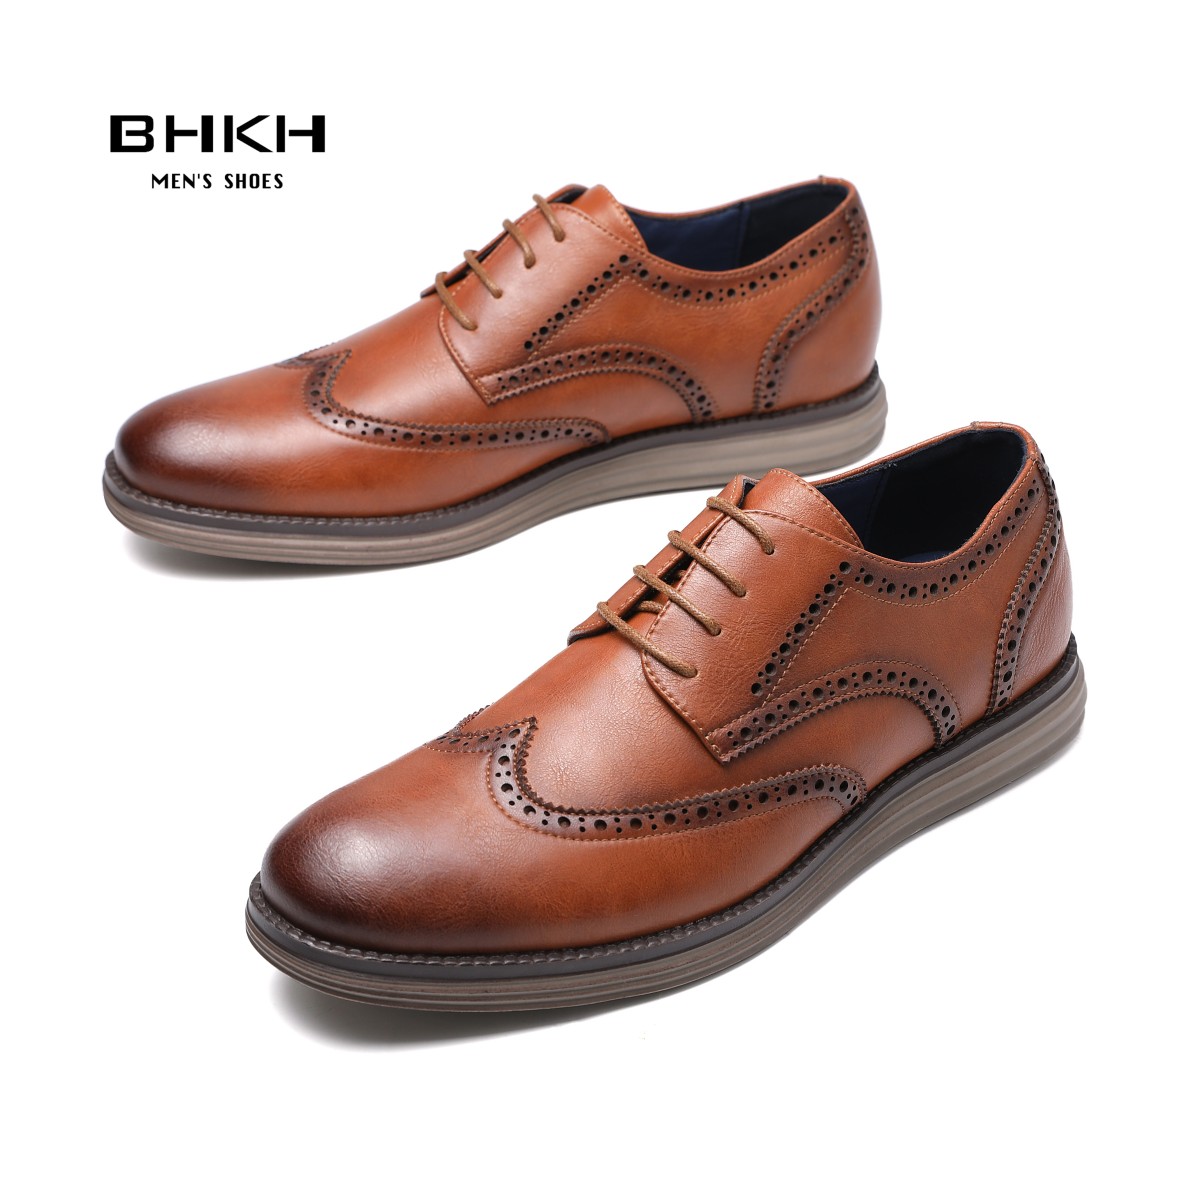 Mens Casual Shoes Leather Smart Business Work Office Lace-up Dress Shoes